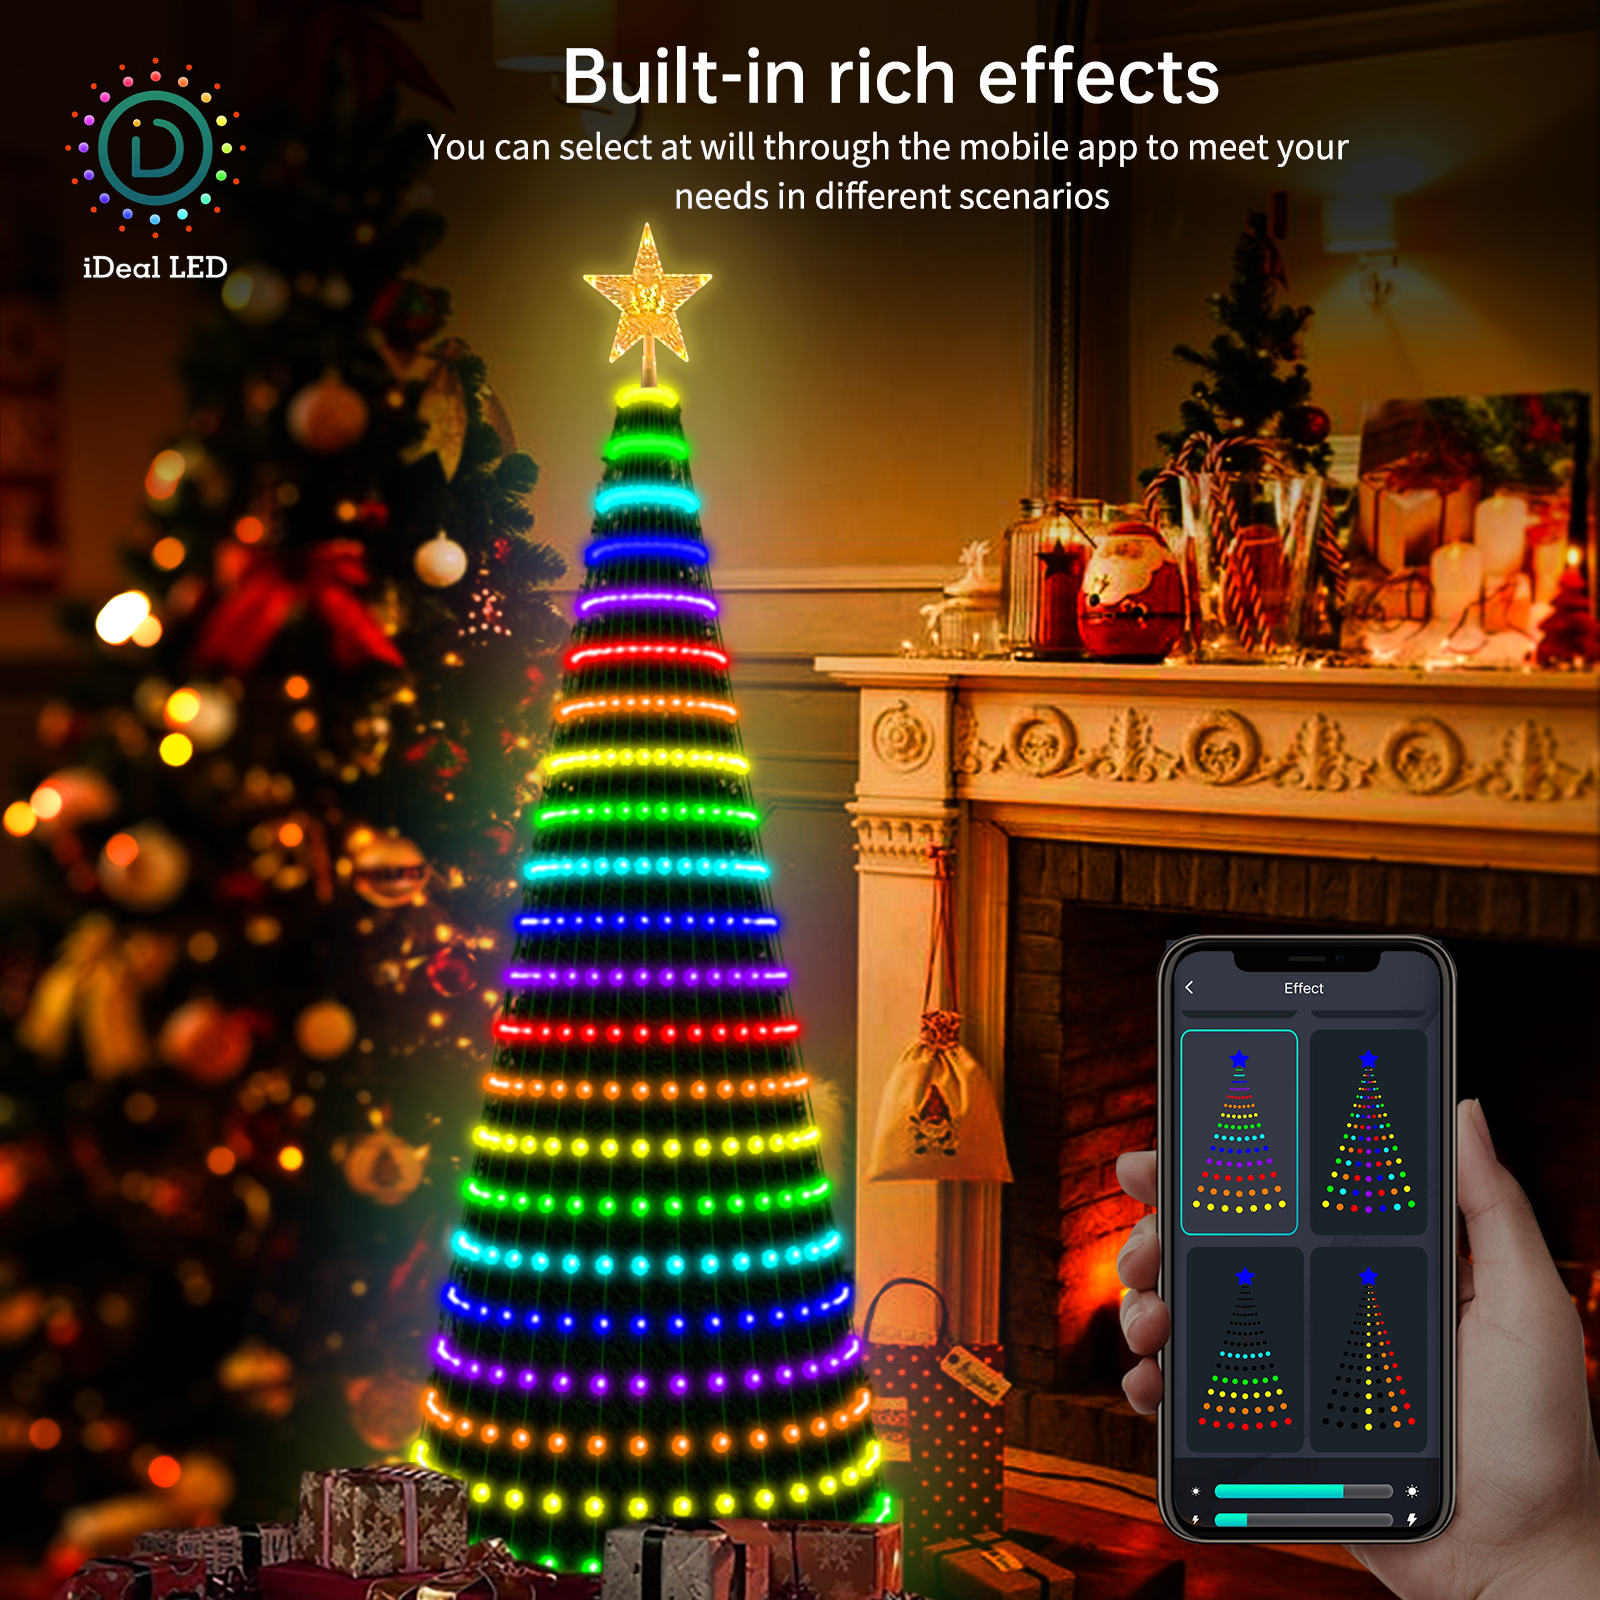 ONLY LIGHT,DIY Smart Christmas Lights with Bluetooth APP & Remote  Control,106FT 400 RGB LED Light, Suitable for 5.9Ft High Christmas Tree  (ONLY Light